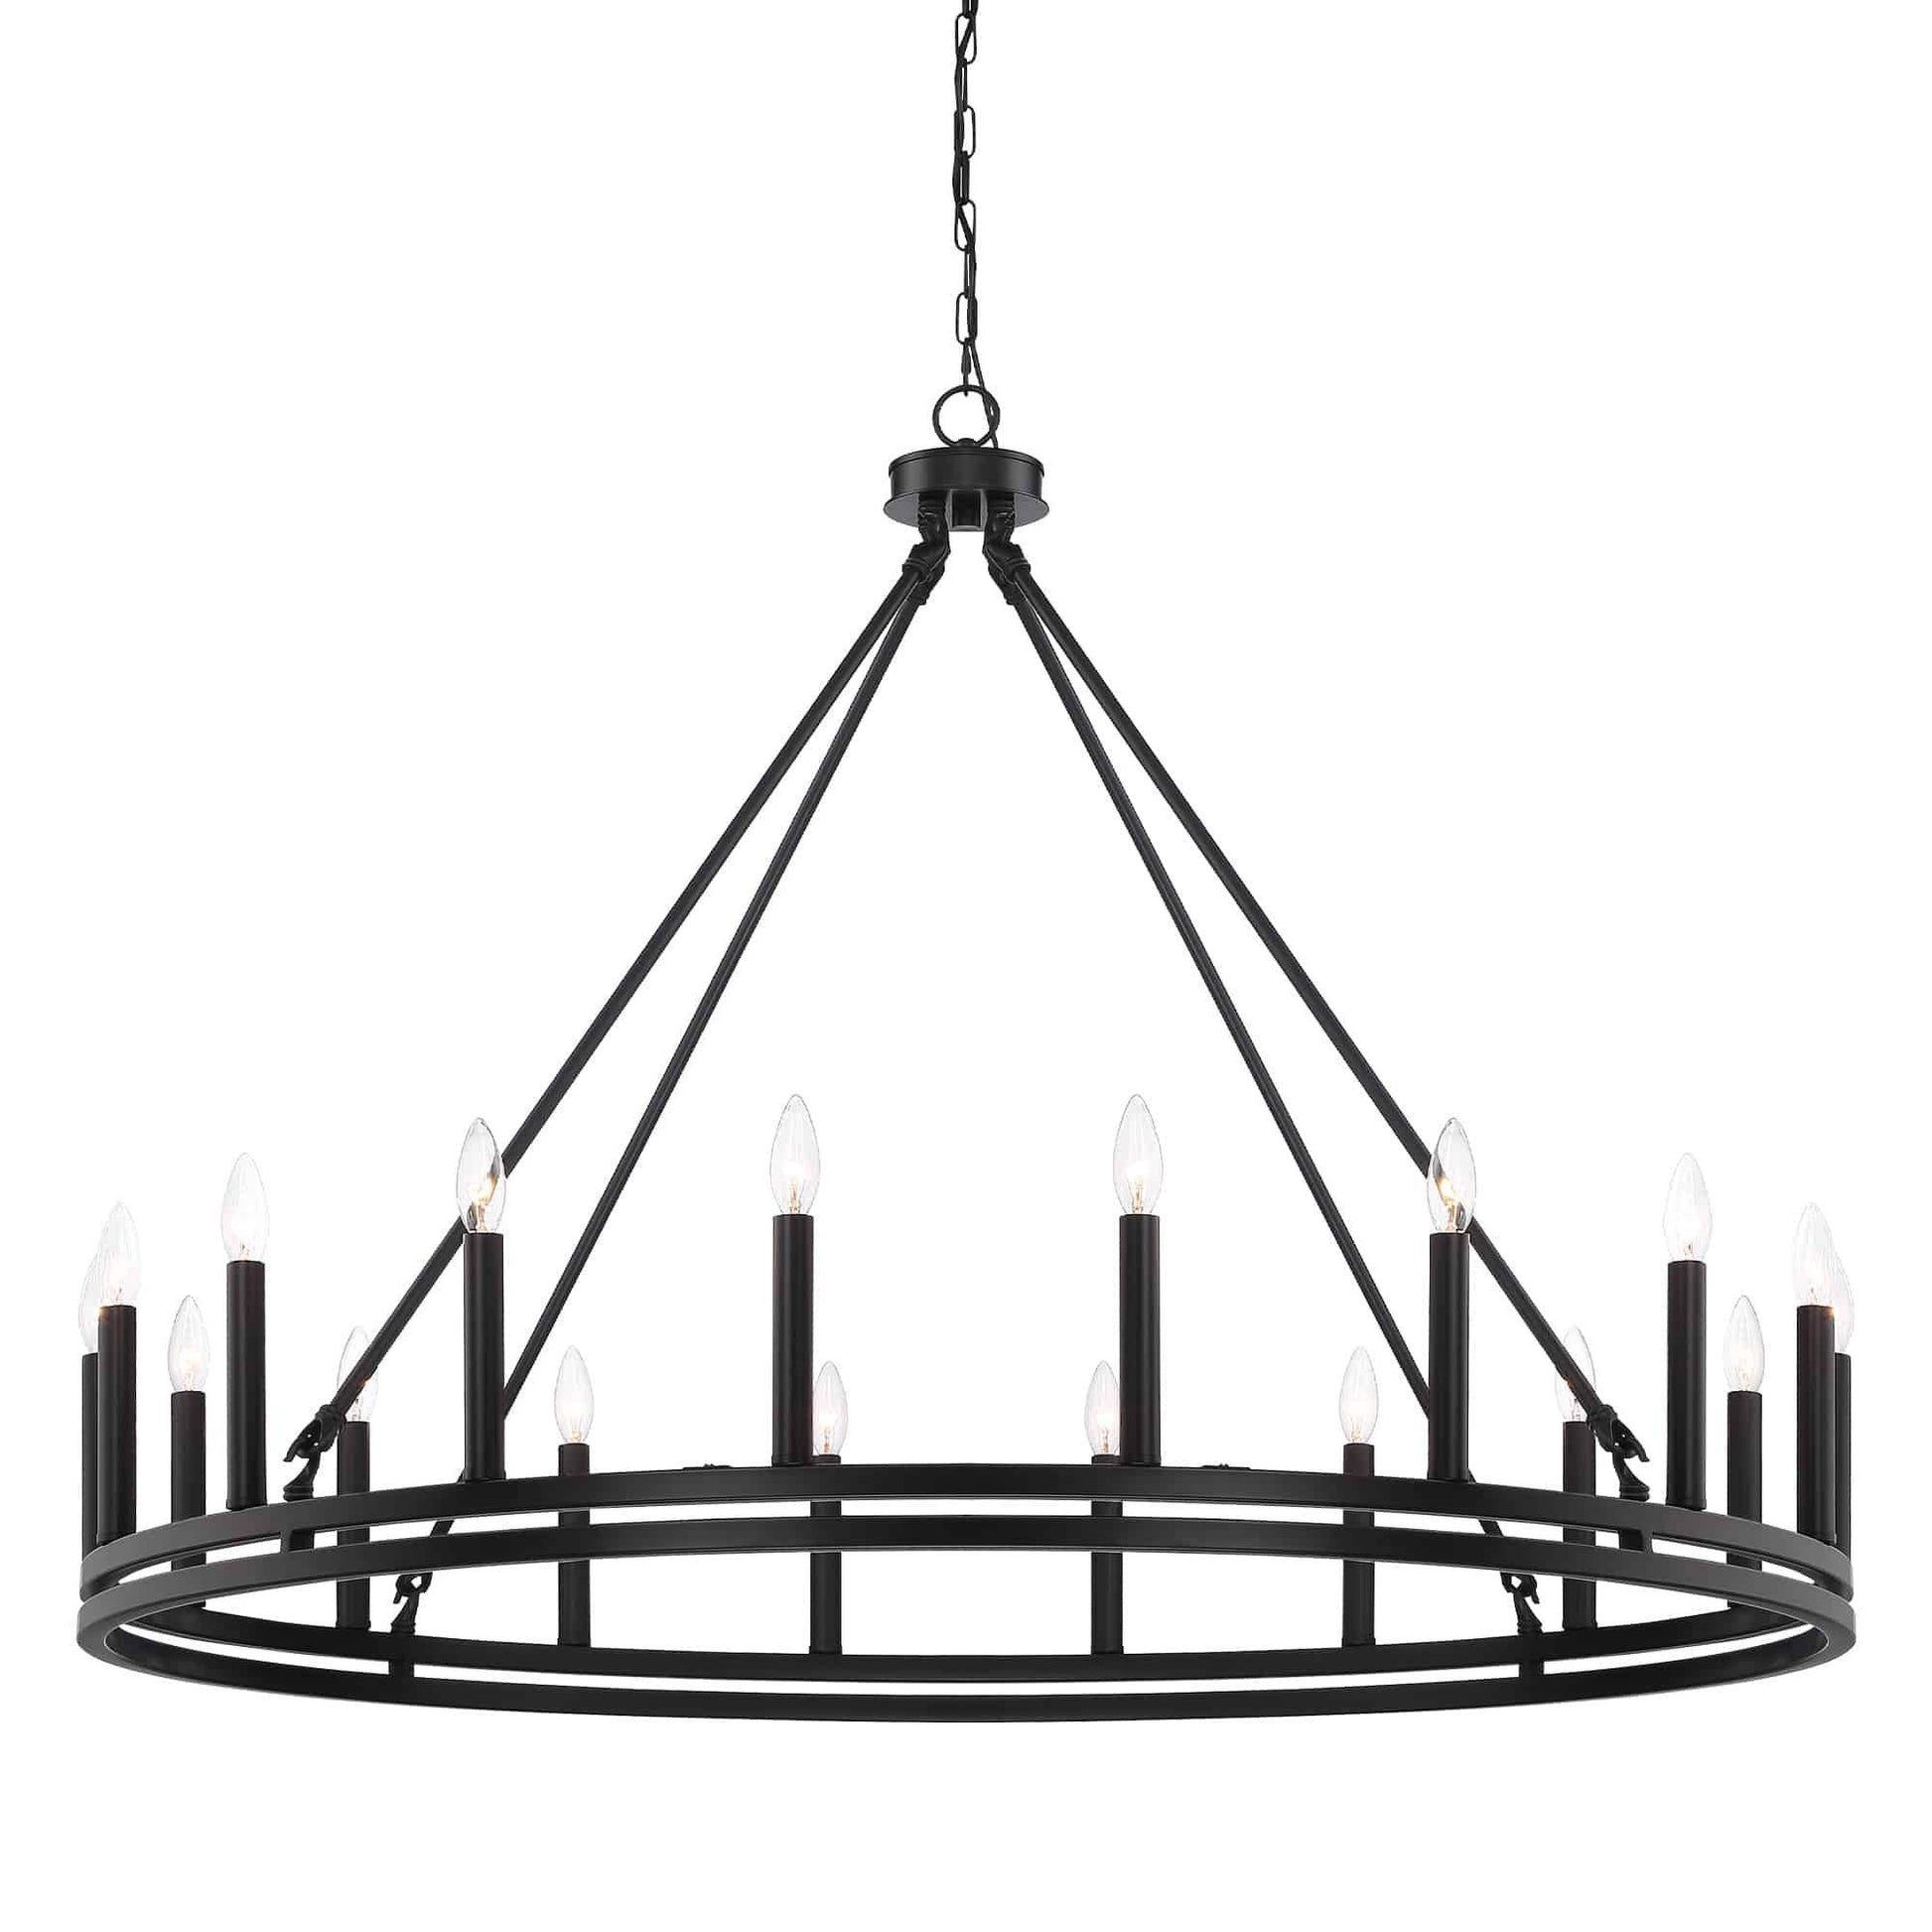 18 light candle style wagon wheel chandelier (12) by ACROMA